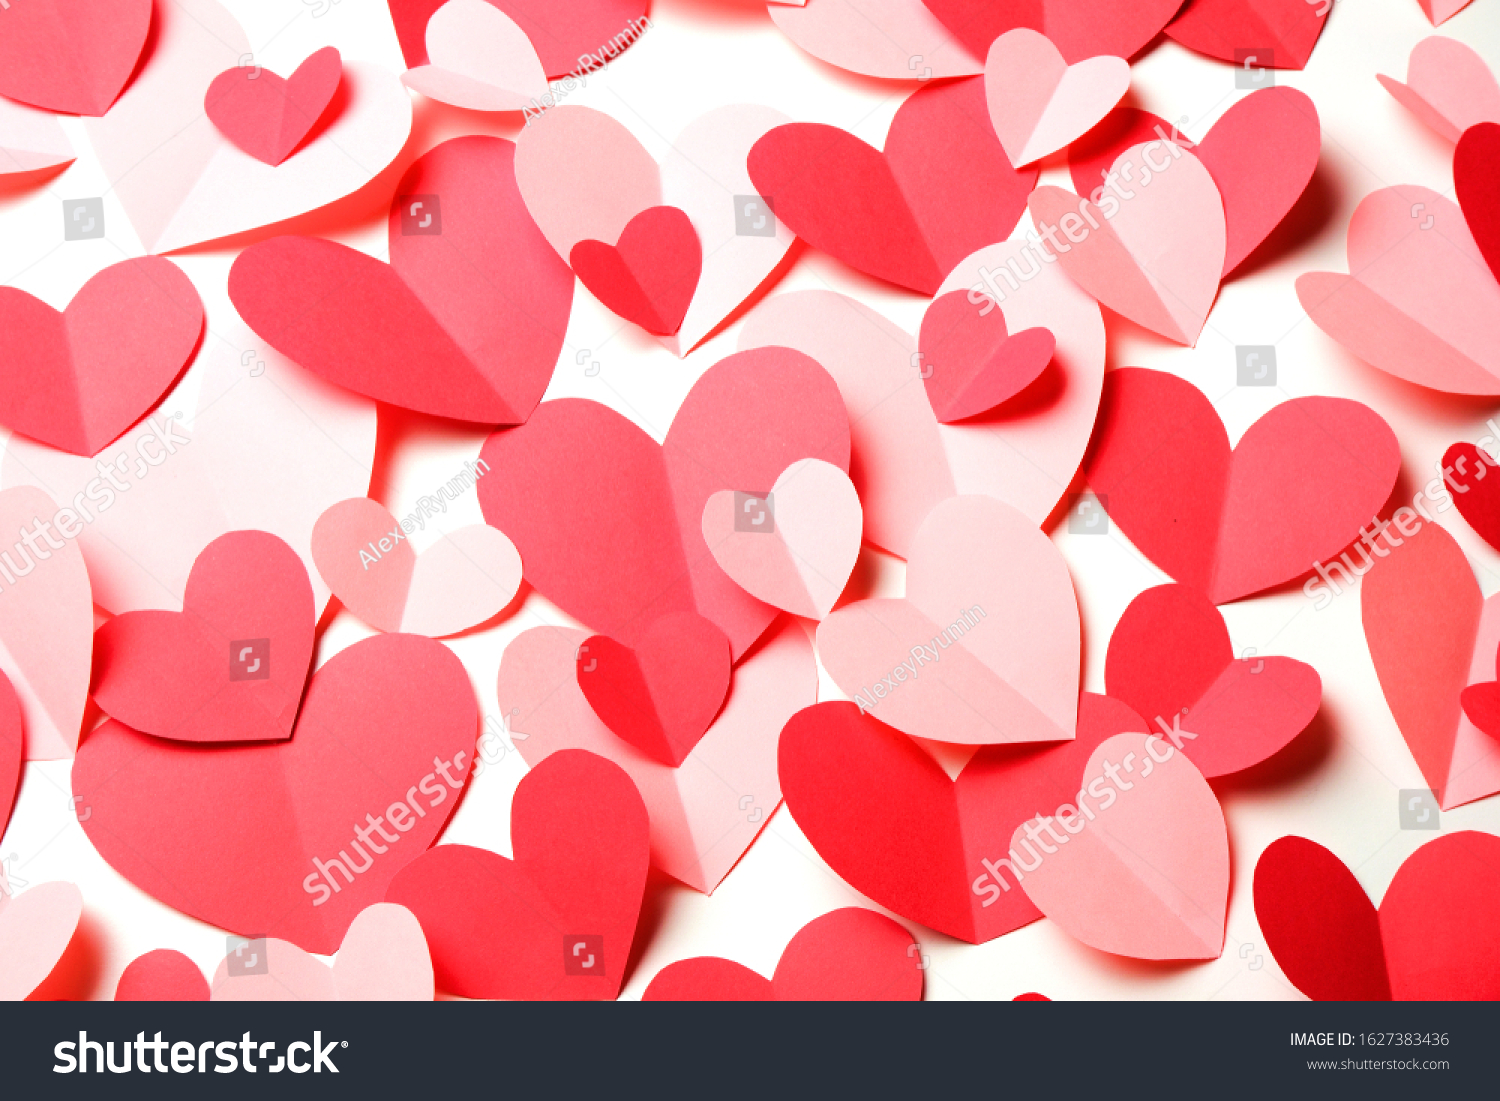 Bunch of cut out of pink and red paper hearts on white background closeup. Good Valentines day, Womans day, love, romantic or wedding card, banner, invitation background for banner, congratulation, card, offer, flyer, advertising, invitation.